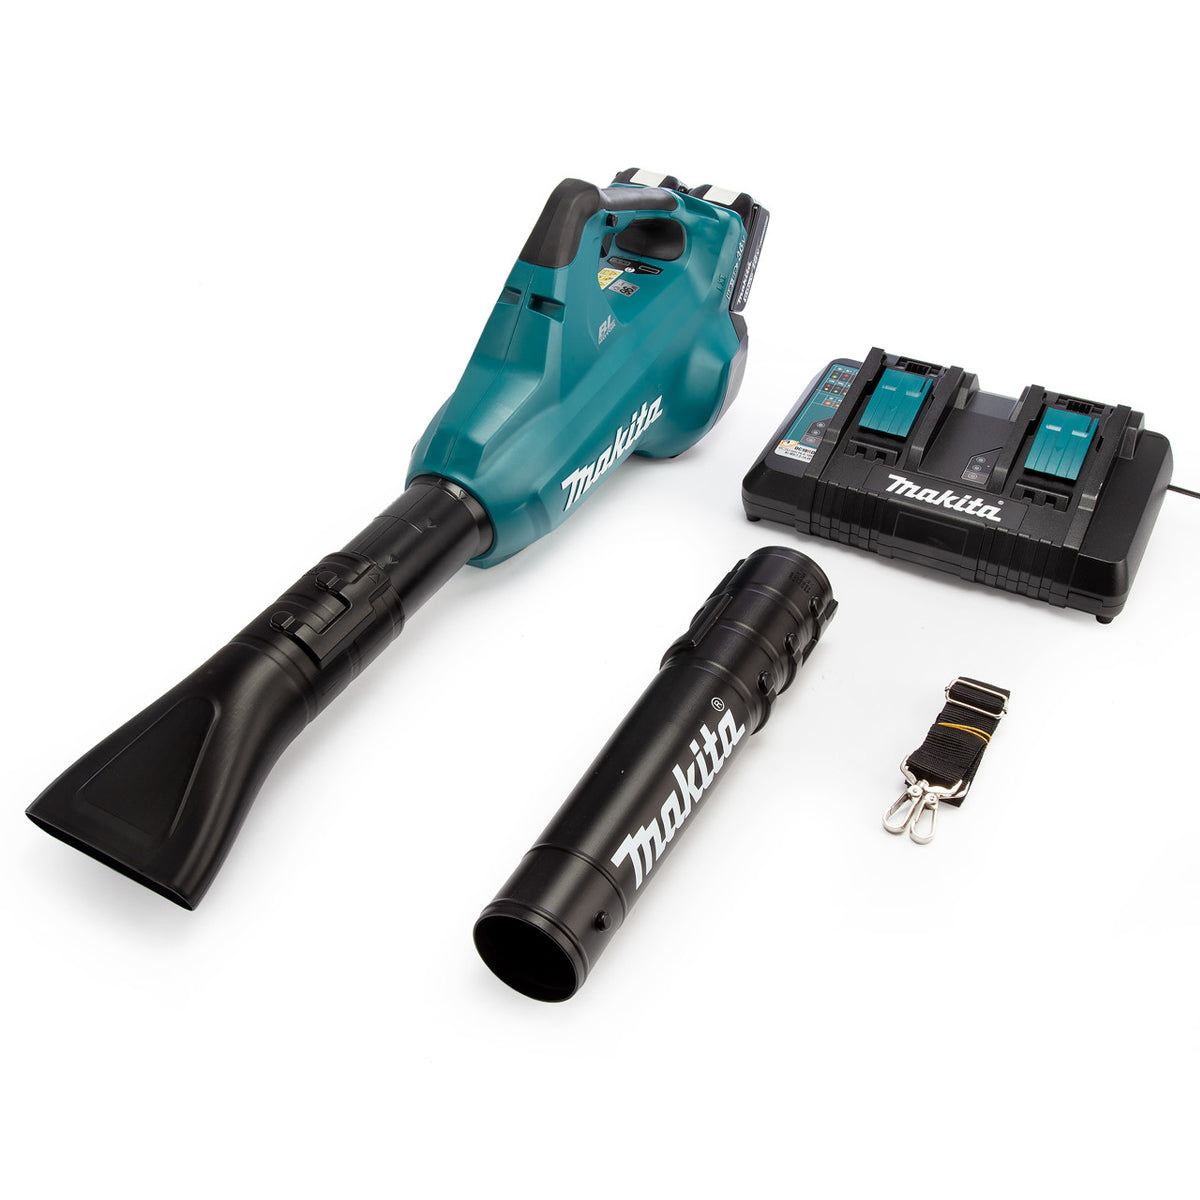 Makita DUB362PG2 36V Brushless Leaf Blower with 2 x 6.0Ah Batteries & Charger